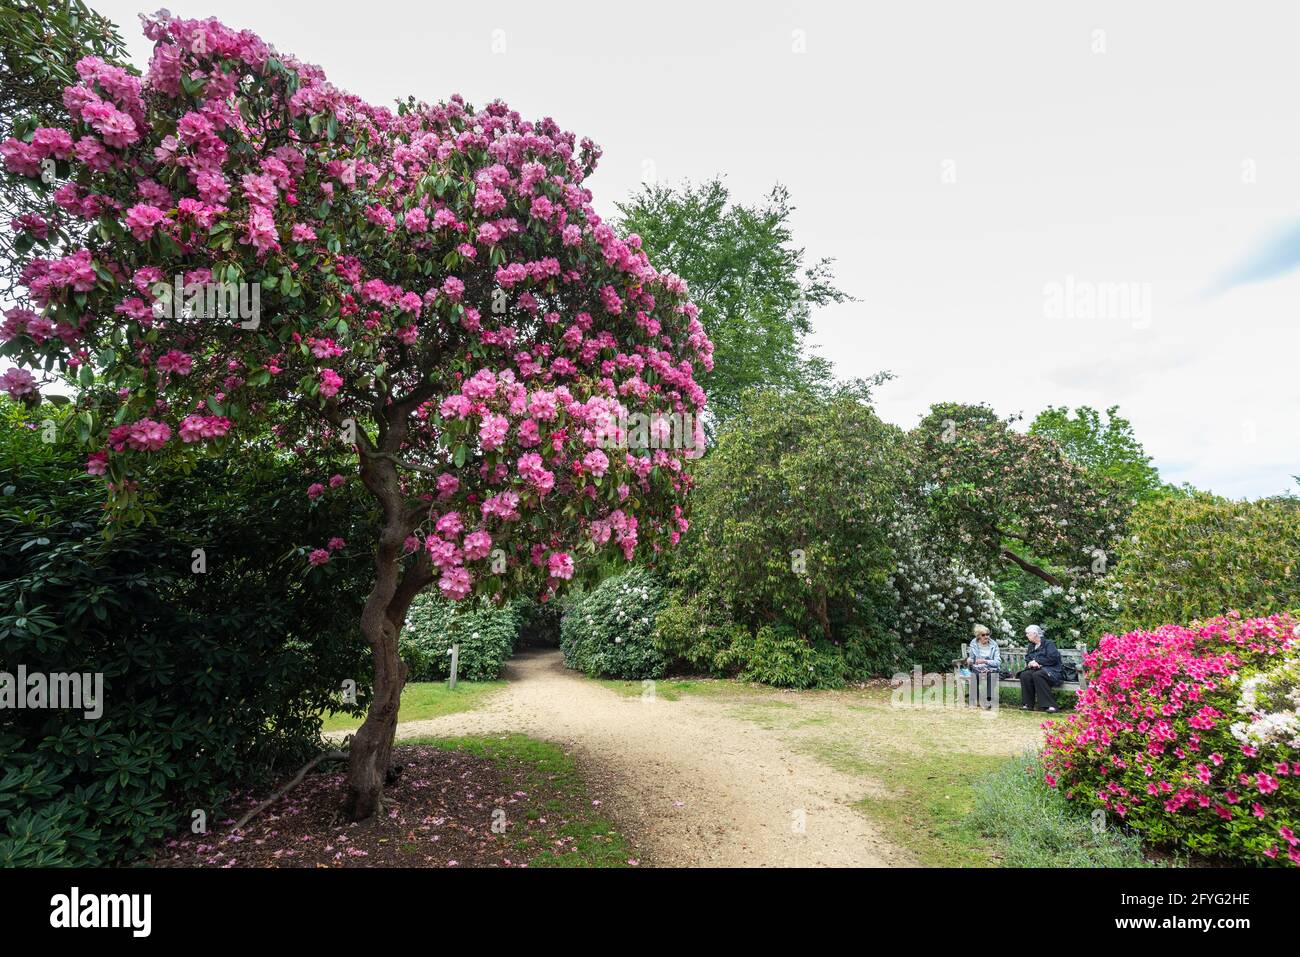 Iver, UK.  28 May 2021. UK Weather: Rhododendrons and azalea, currently in bloom, in the Temple Gardens at Langley Park in Iver, Buckinghamshire ahead of the Bank Holiday weekend, when temperatures are expected to rise above 20C.  Langley Park is a former royal hunting ground with links back to King Henry VIII, Queen Elizabeth I and Queen Victoria.   Credit: Stephen Chung / Alamy Live News Stock Photo